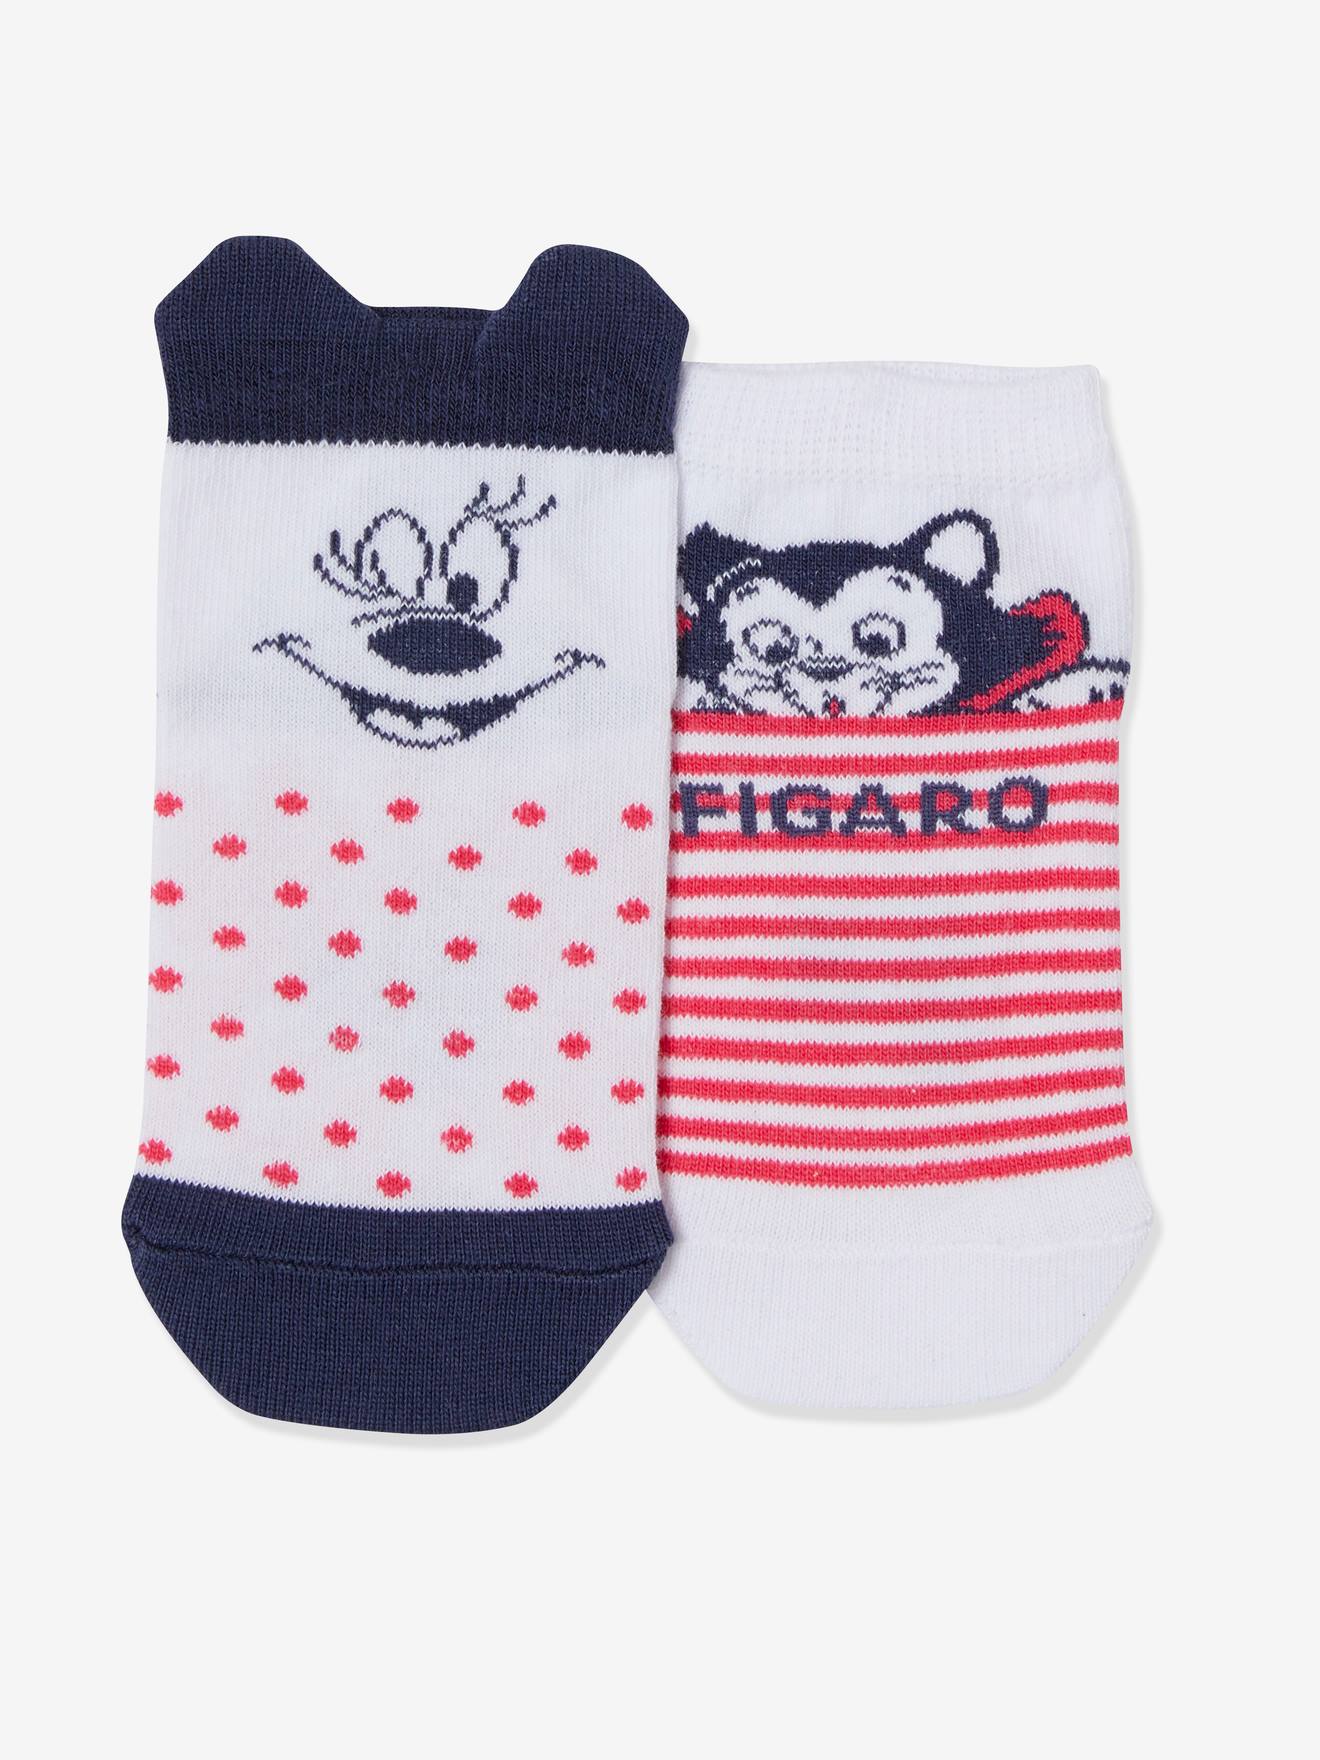 Pack of 2 Pairs of Socks, Disney Minnie Mouse & Figaro(r) white